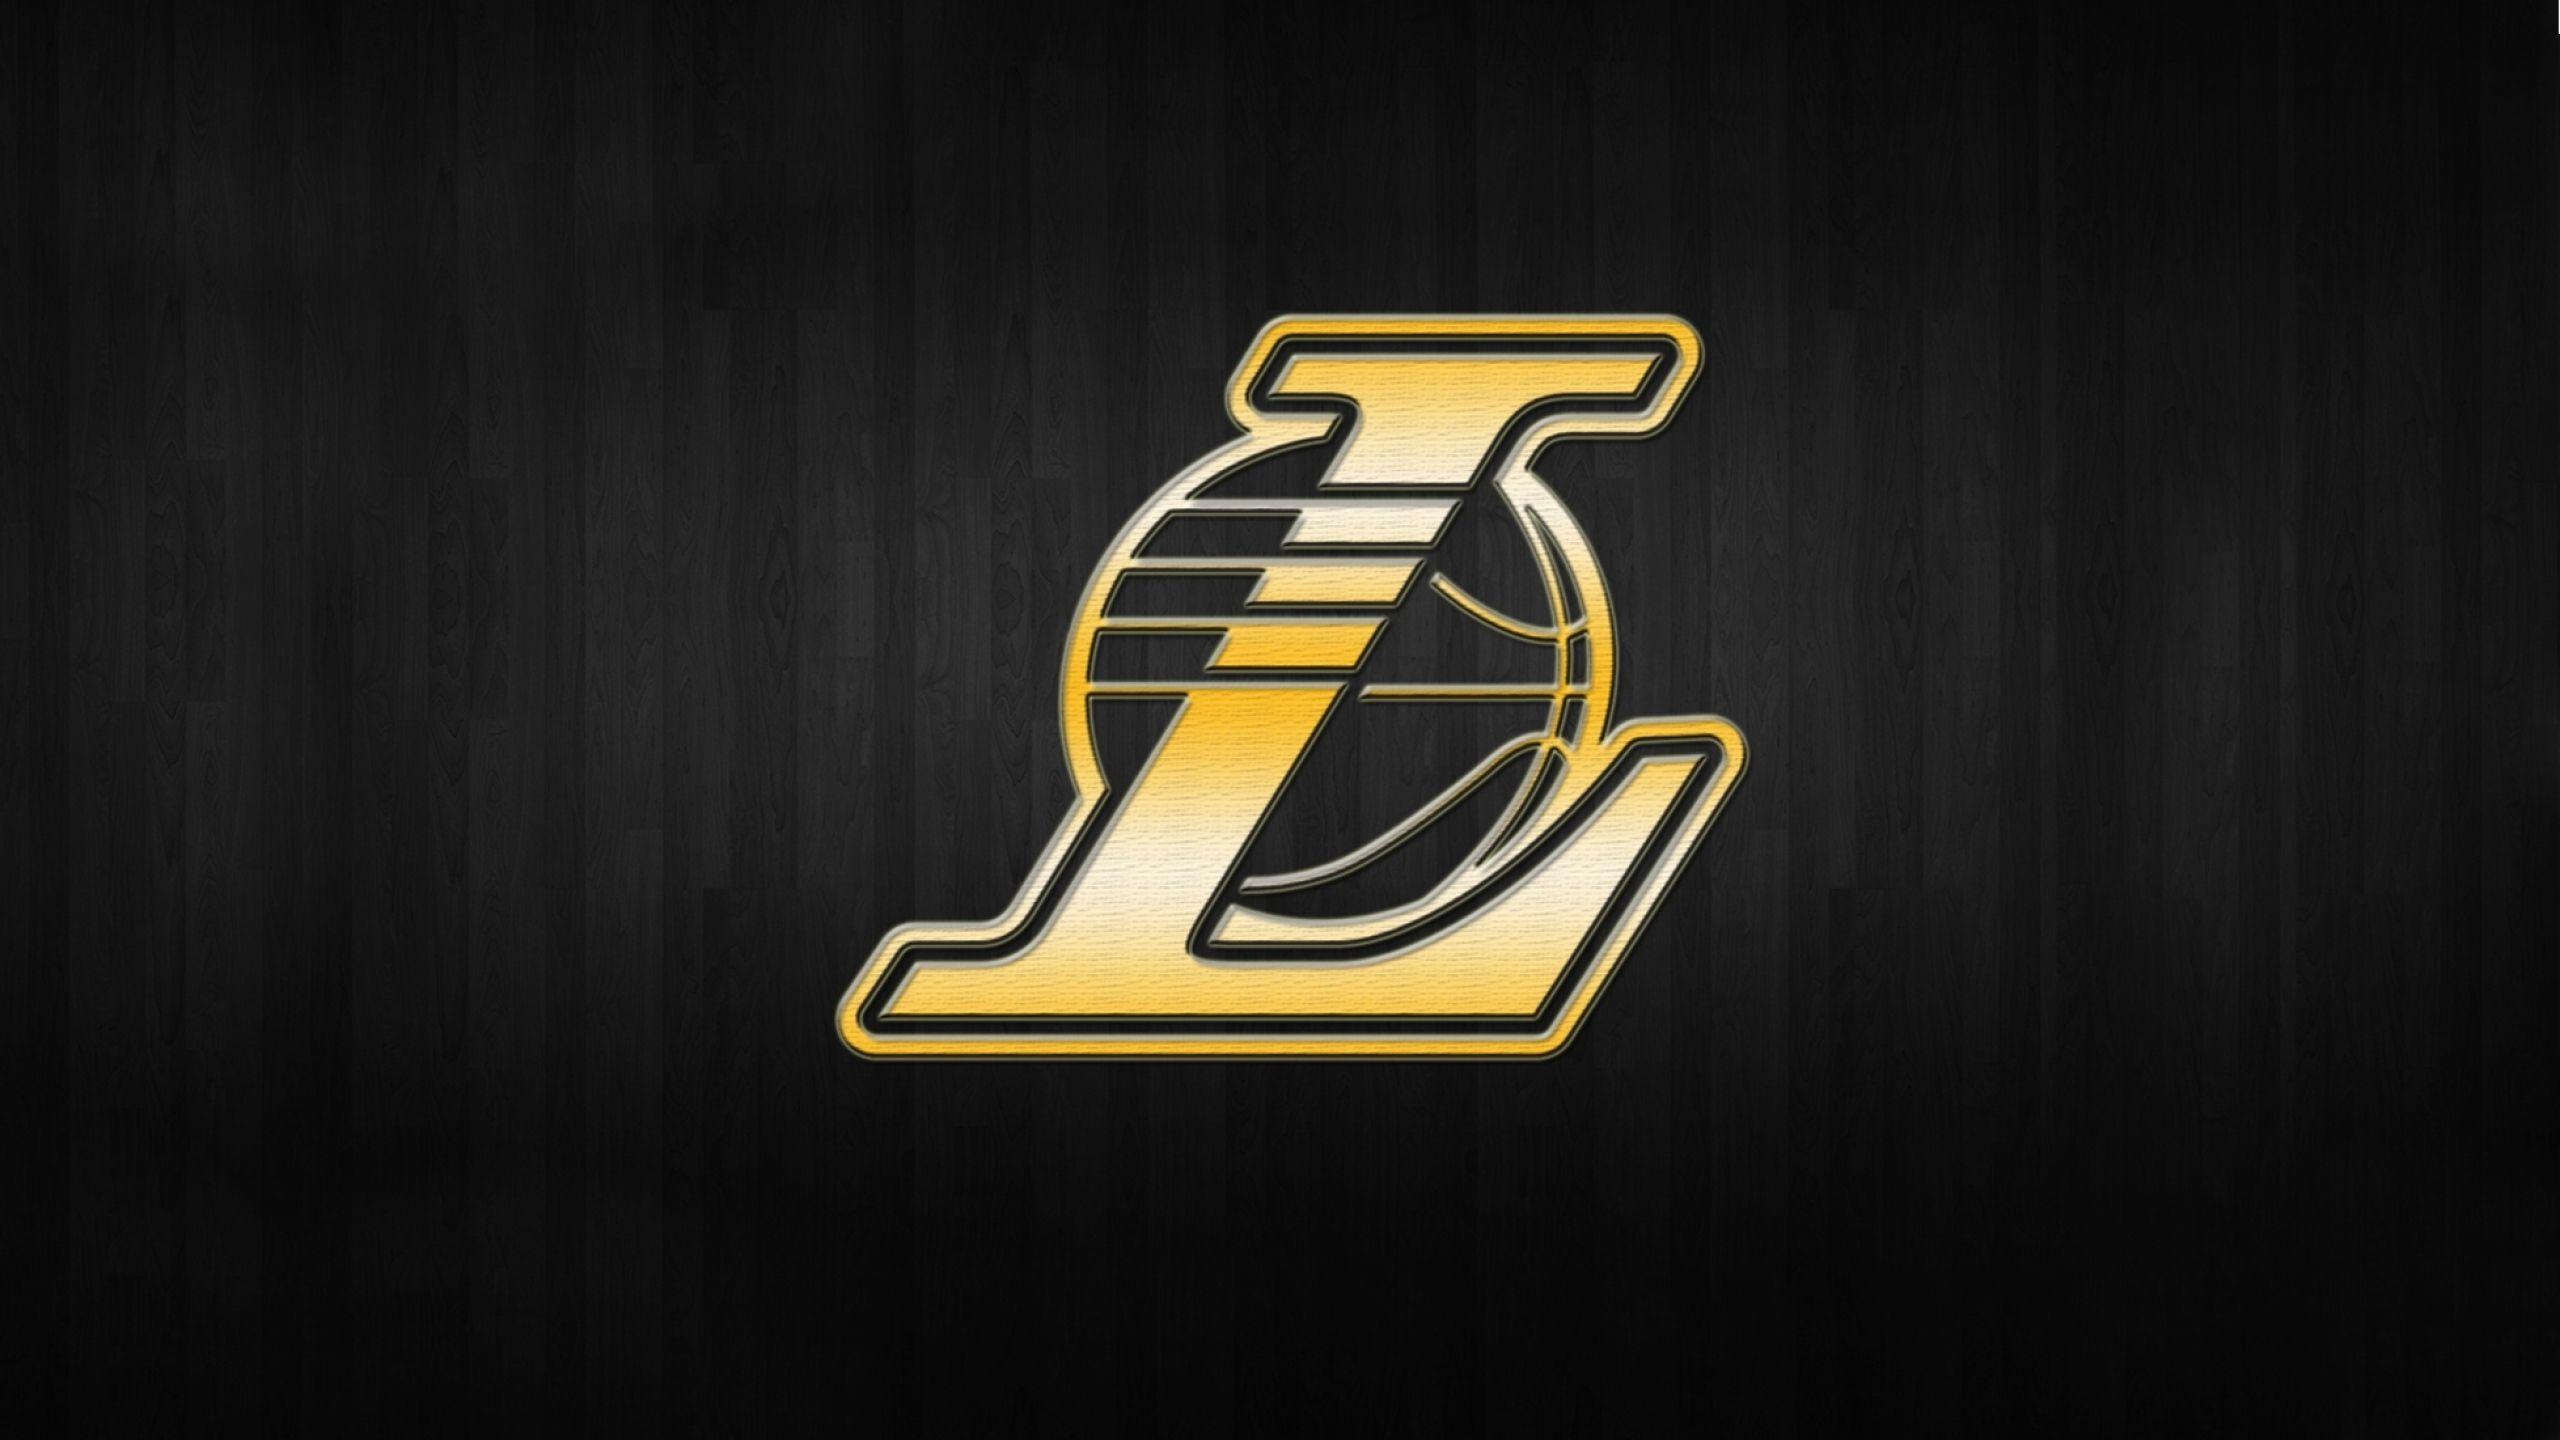 Los Angeles Lakers Nba Logo Background Gold 2560x1440